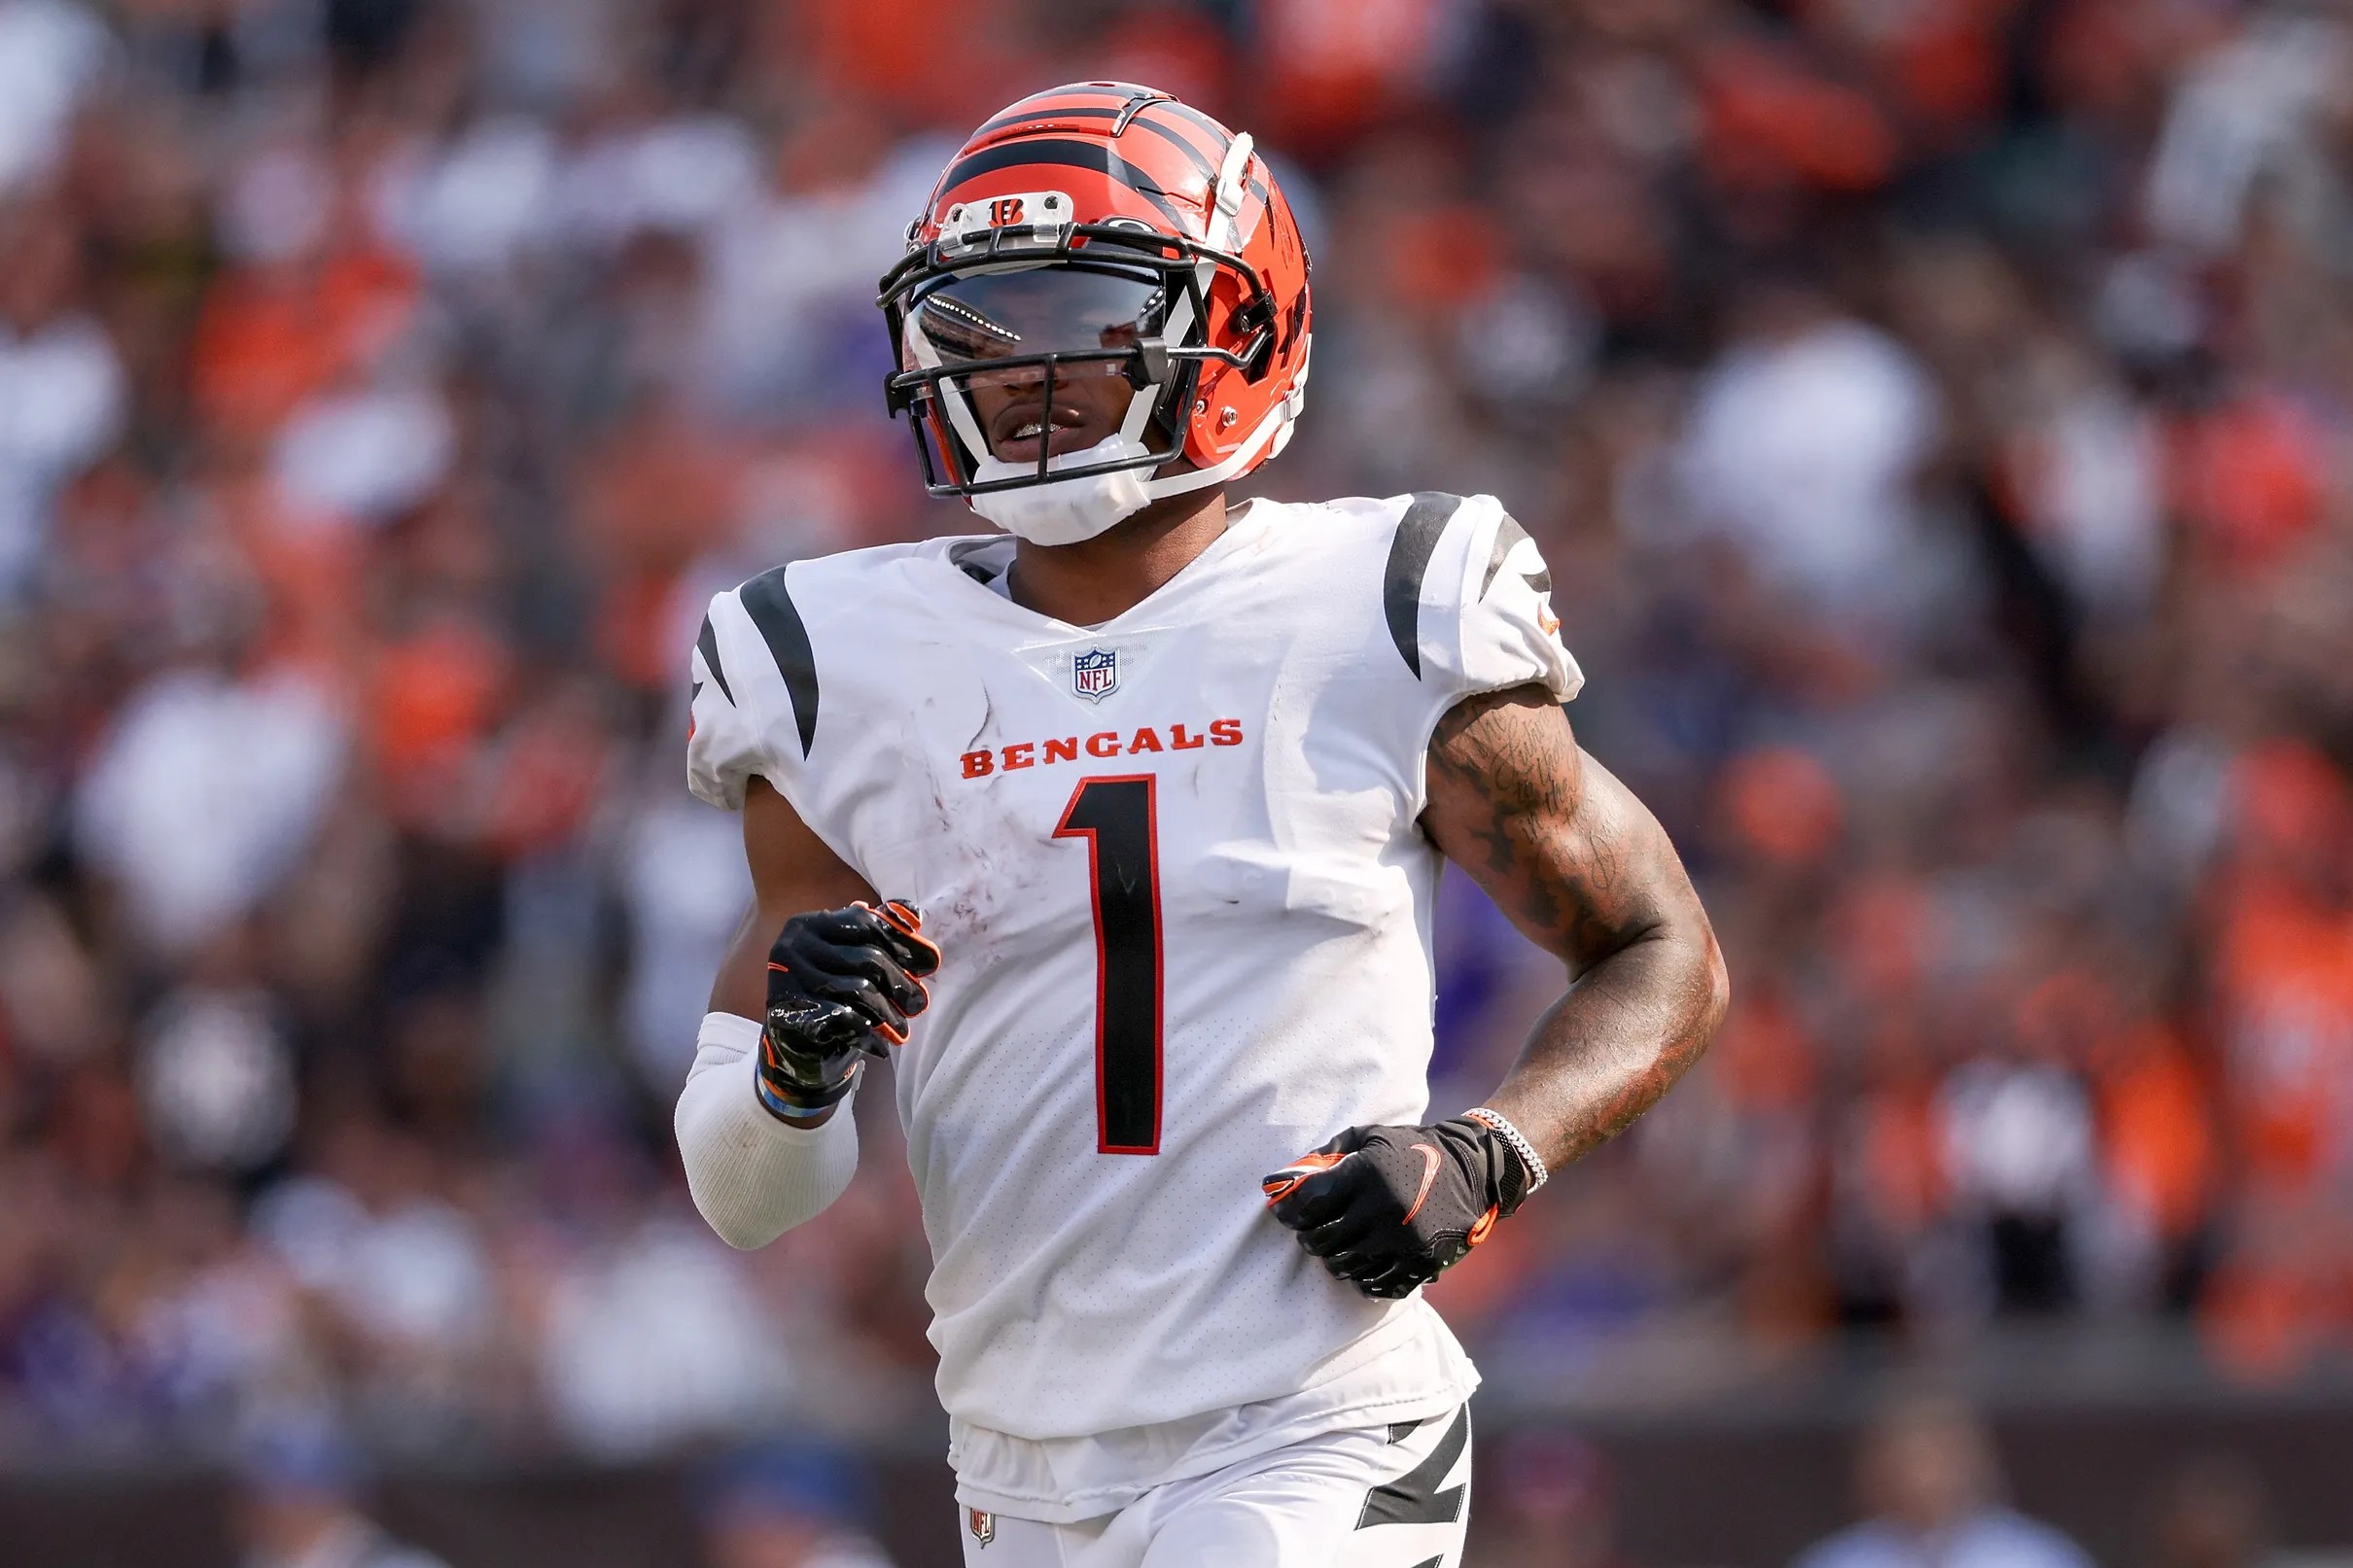 Bengals Week 1 rookie stock report: Ja'Marr Chase finds his hands